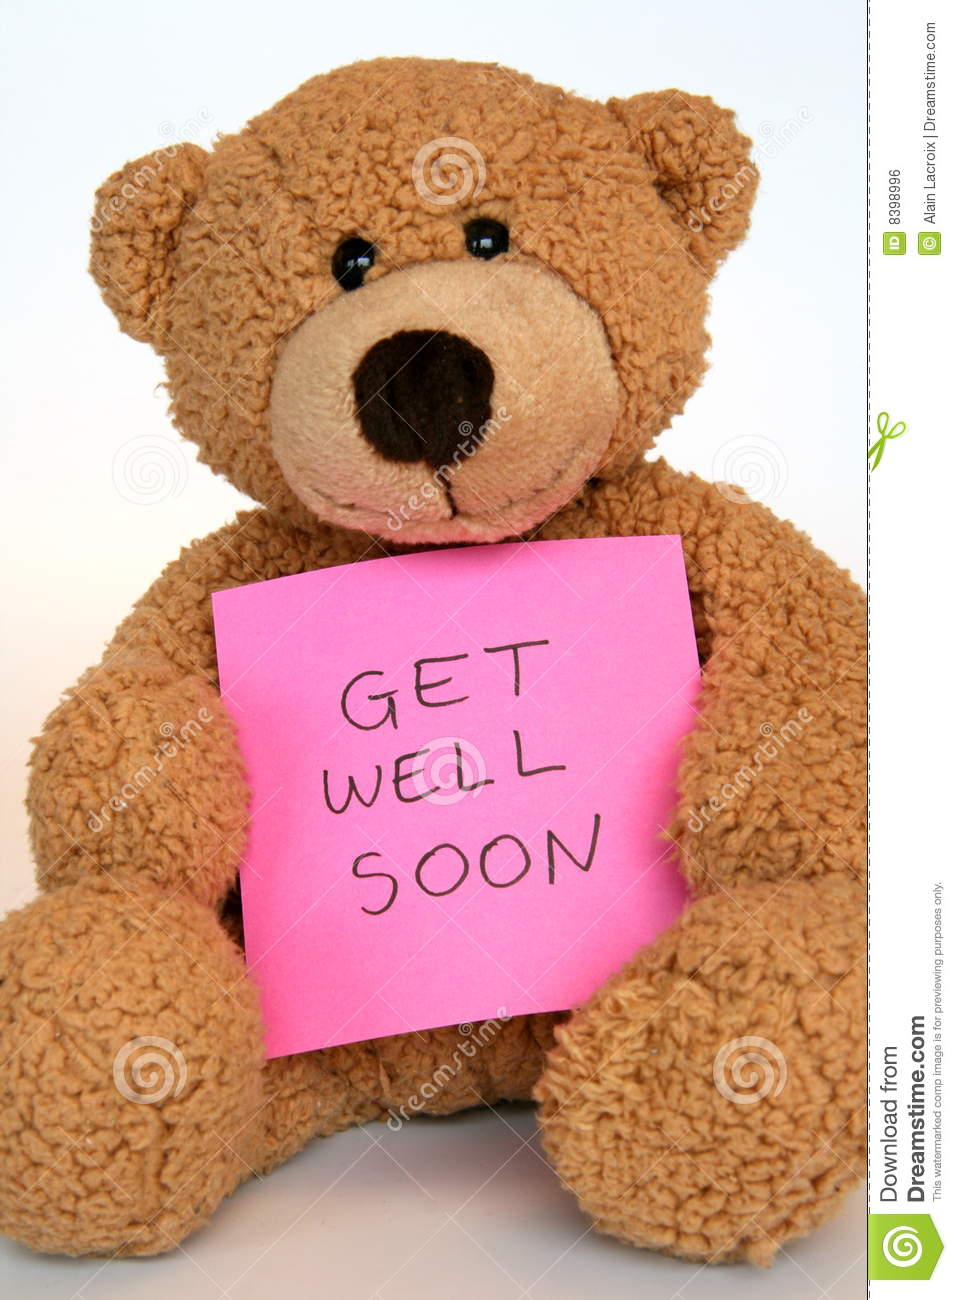 15 Best Get  Well  Soon  Love Images